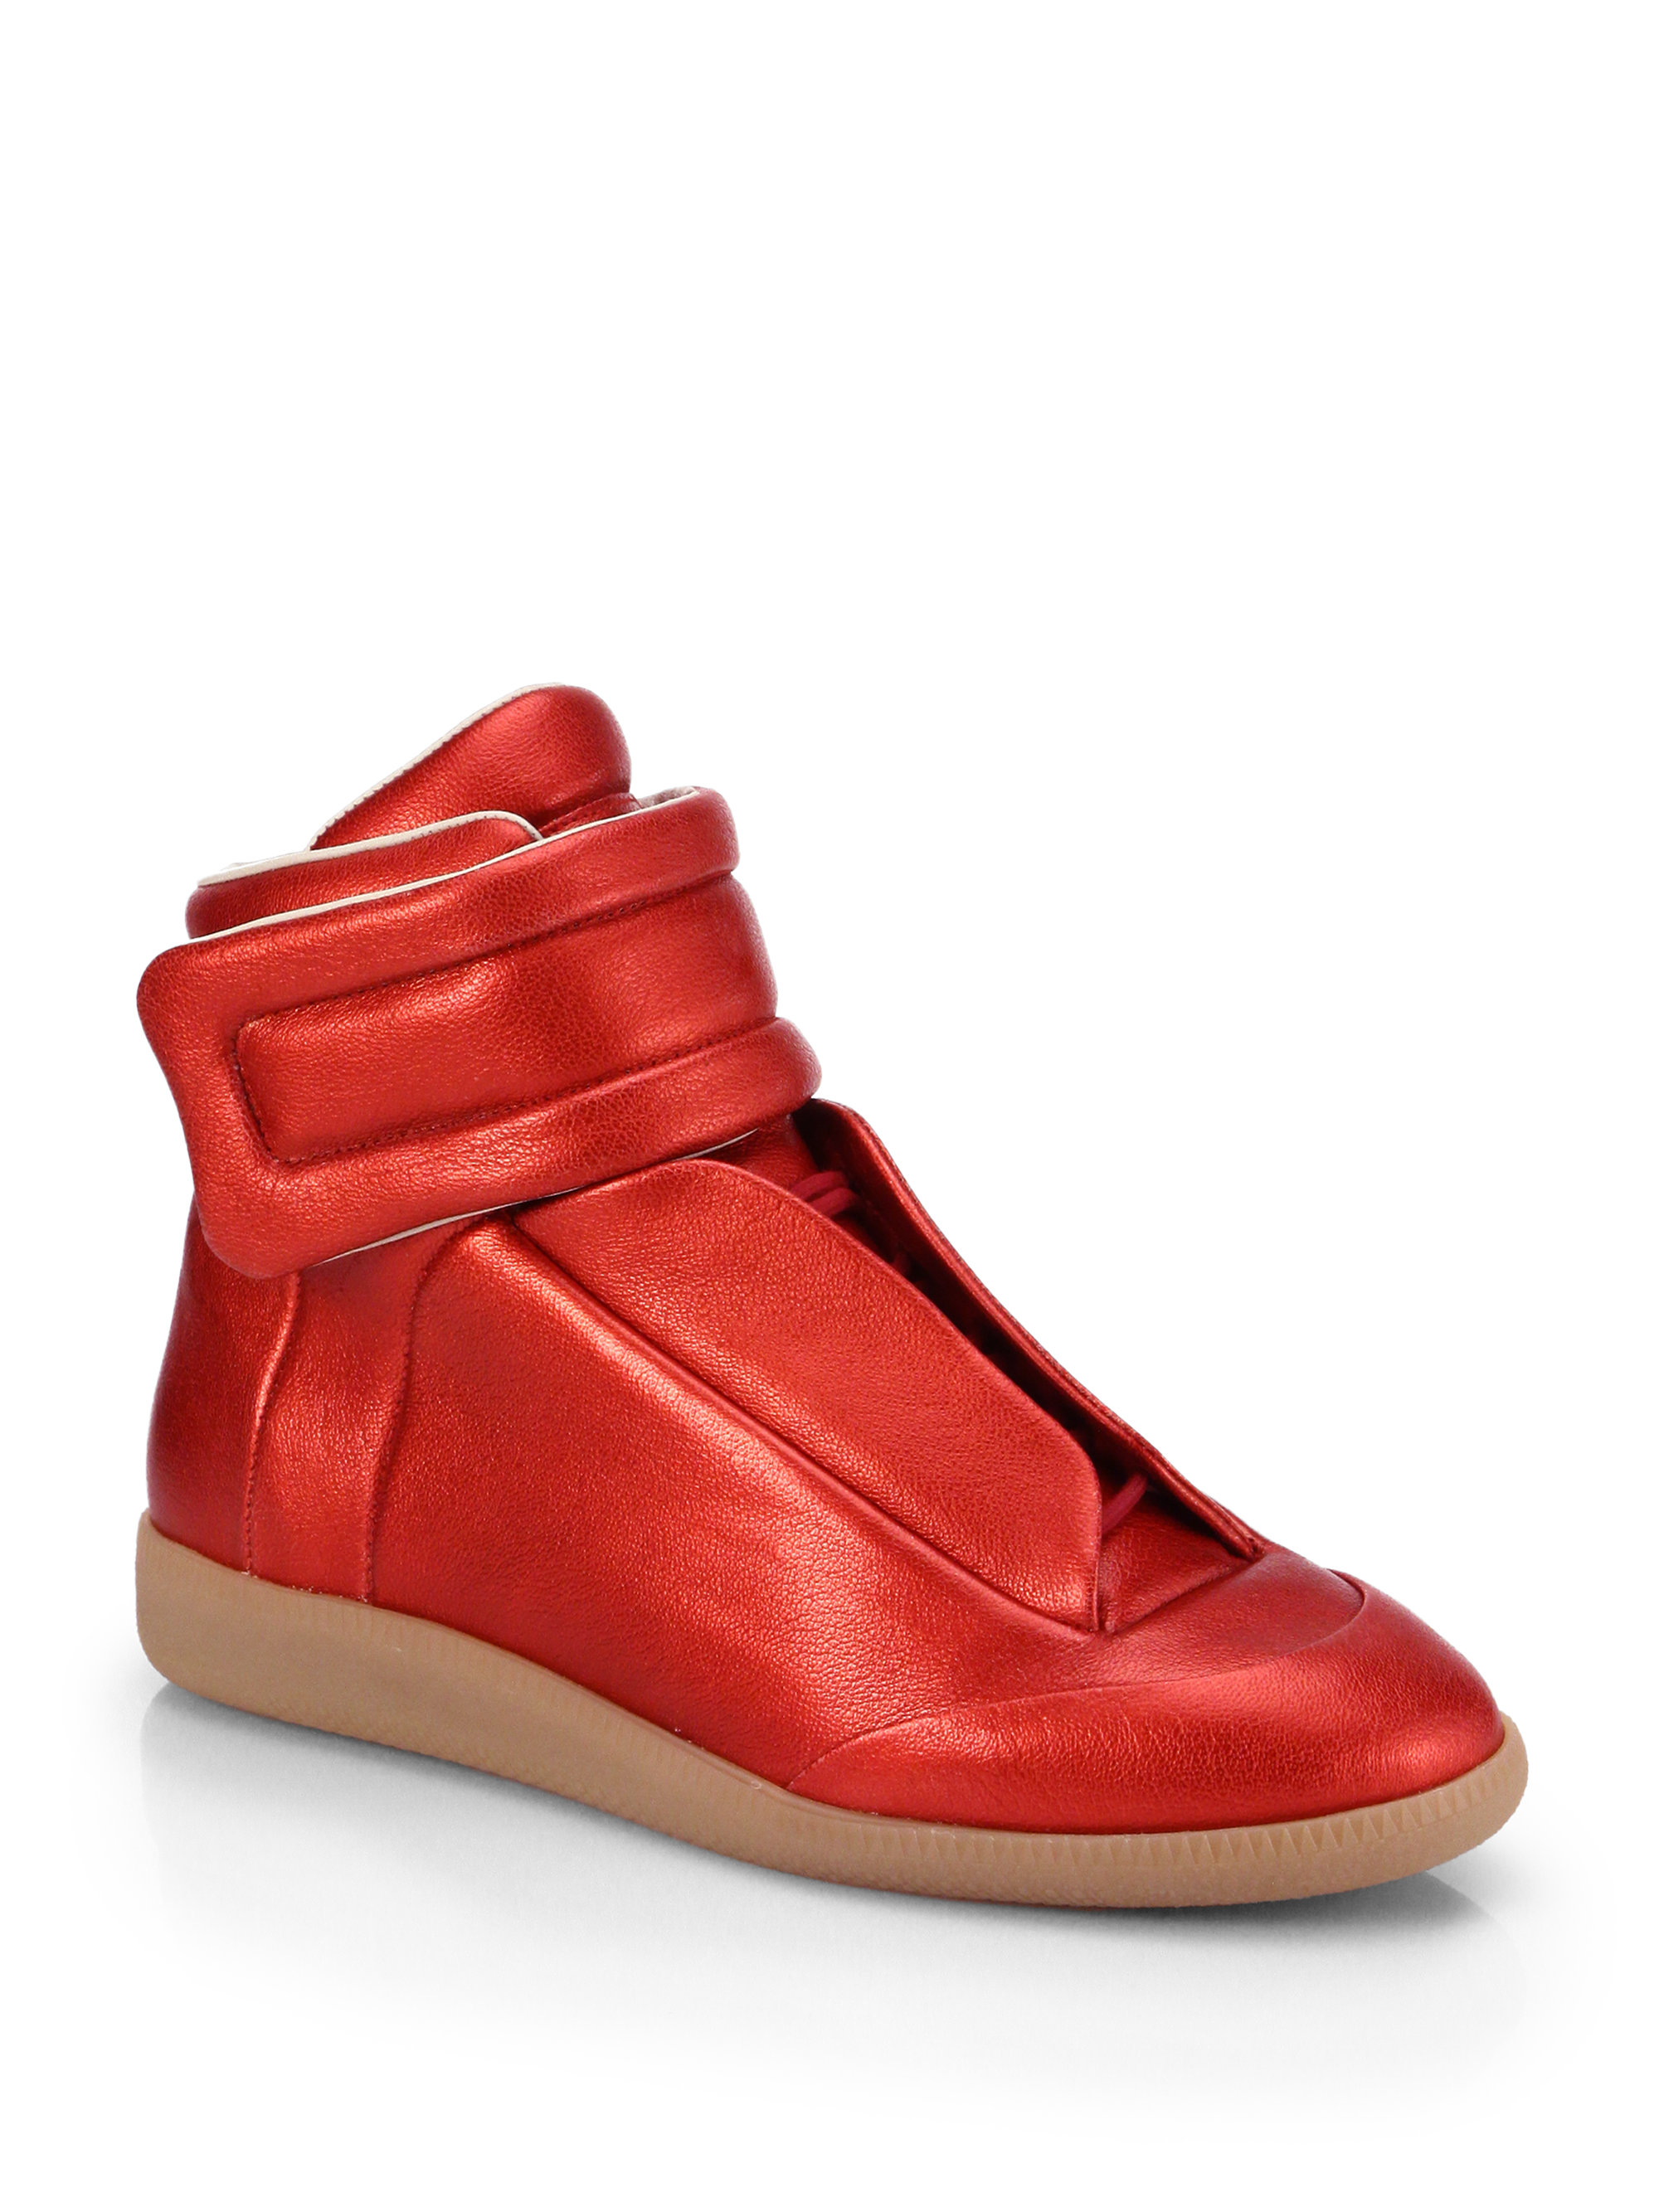 Maison Margiela Future Leather Hightop Sneakers in Red for Men | Lyst